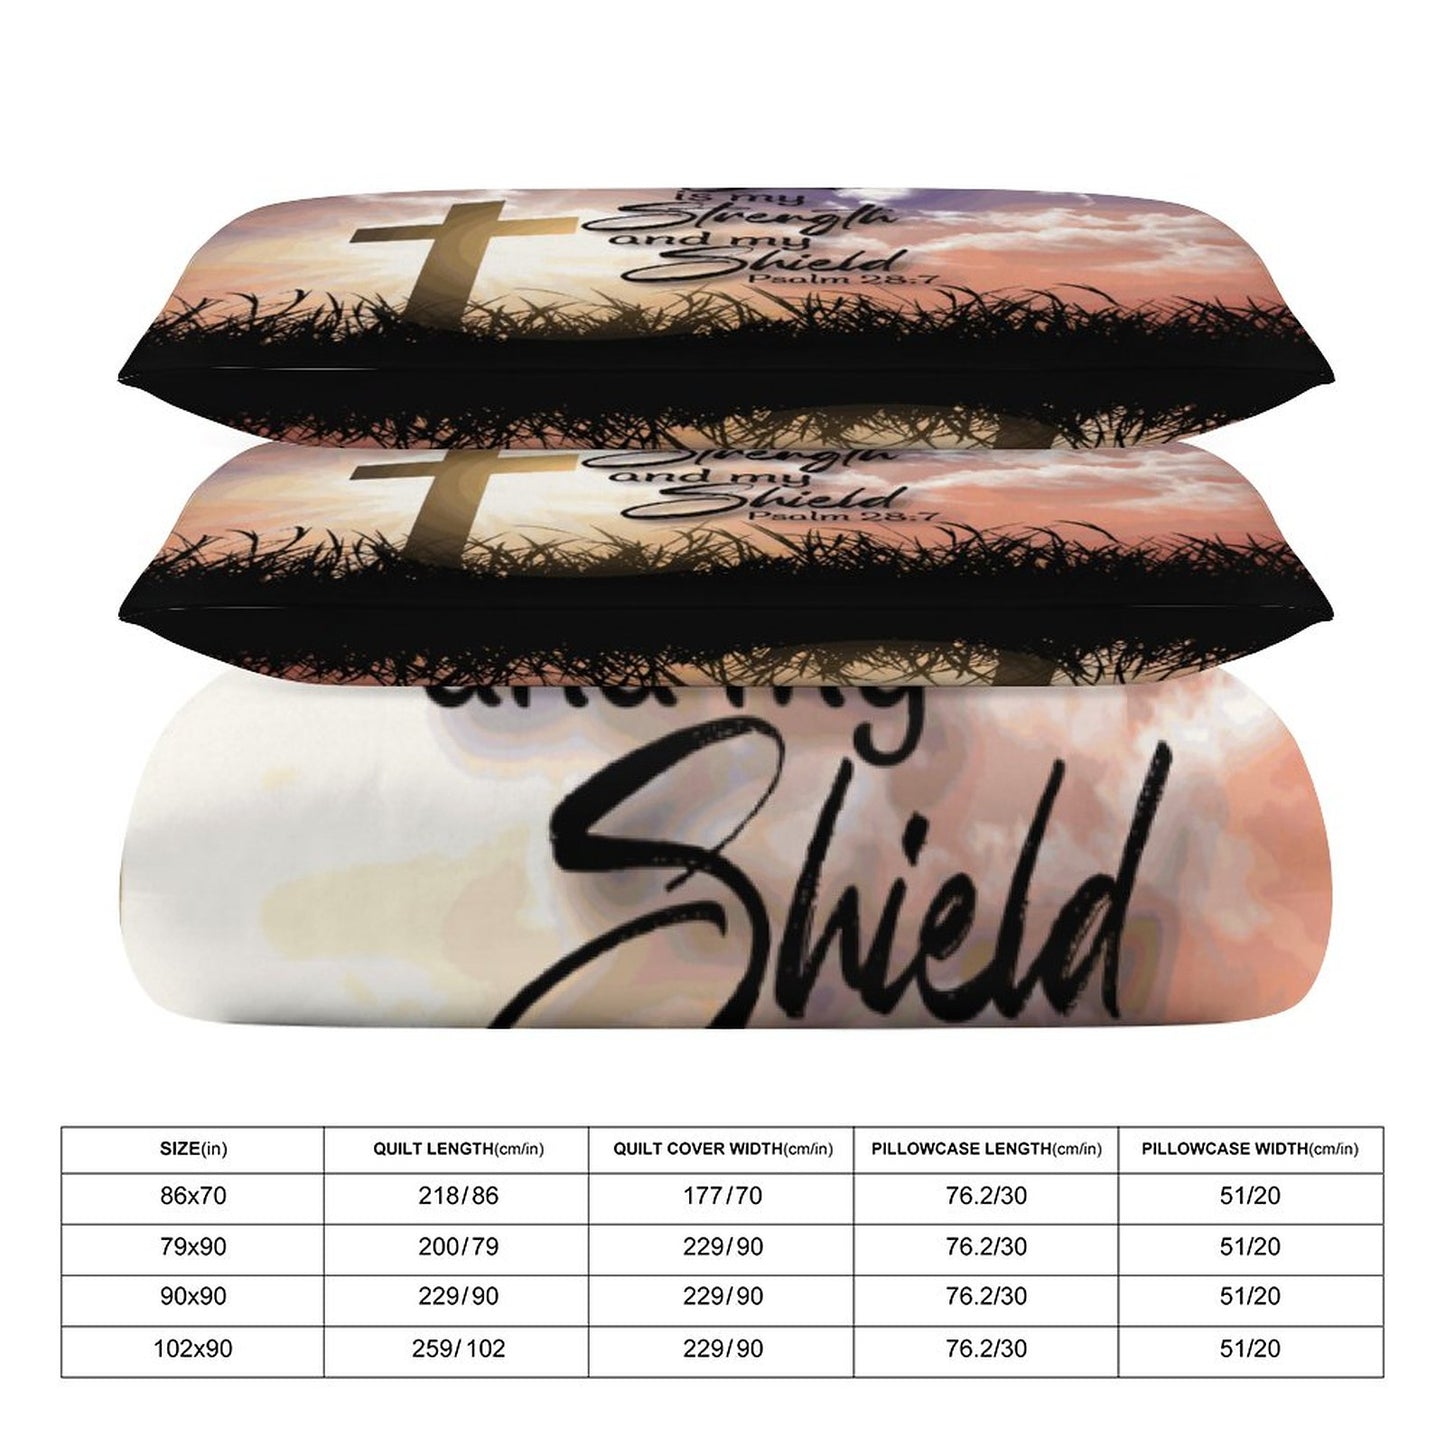 The Lord Is My Strength And My Shield  3-Piece Christian Comforter Bedding Set (Dual-sided Printing)